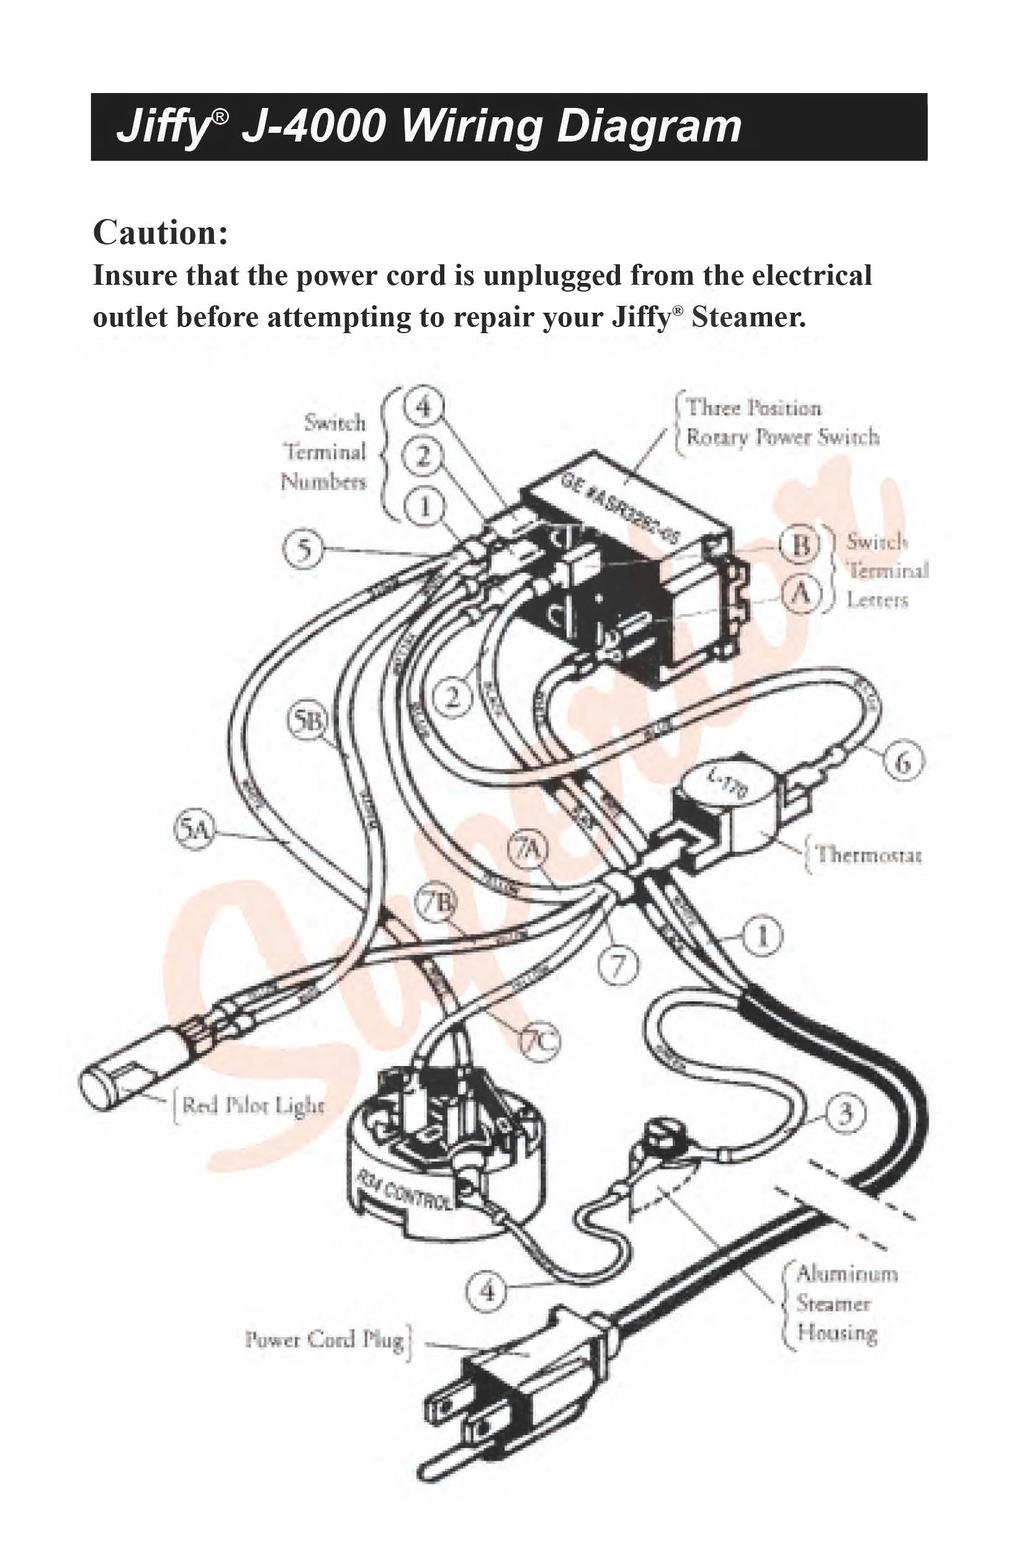 Jiffy J-4000 Wiring Diagram Caution: Insure that the power cord is unplugged from the electrical